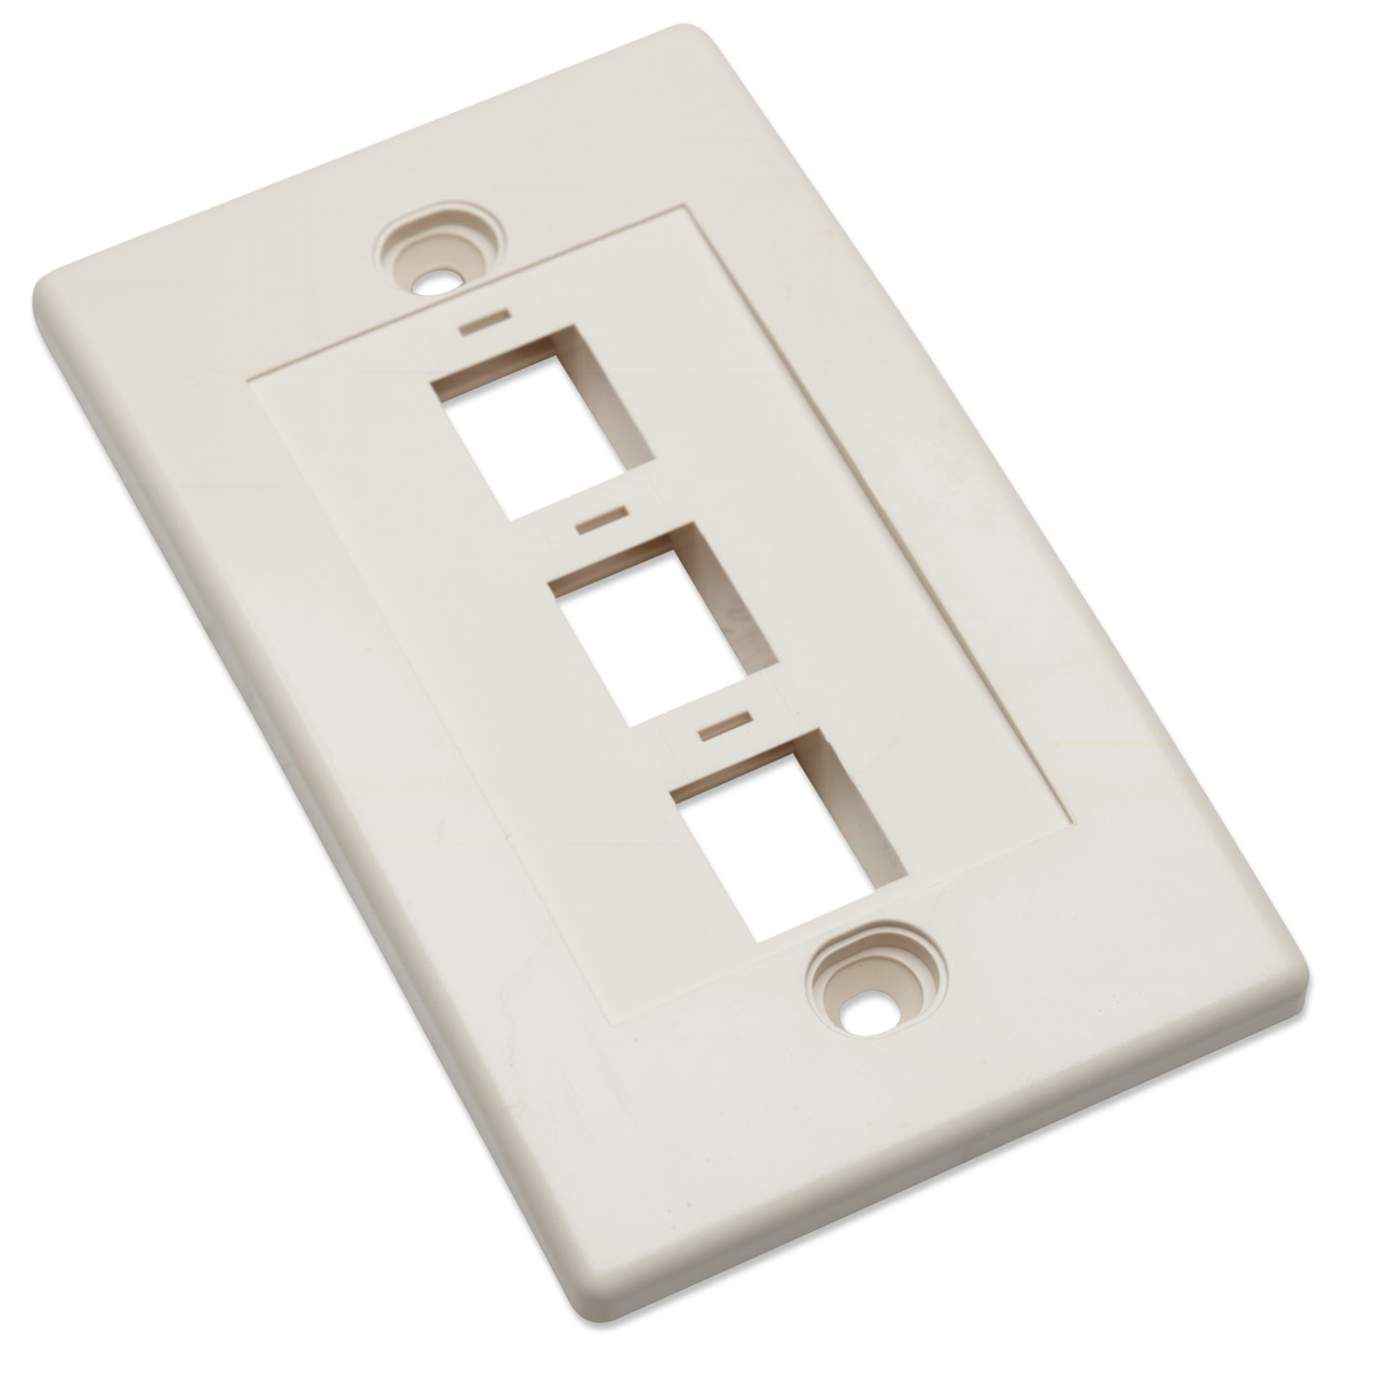 3-Outlet Keystone Wall Plate Image 2